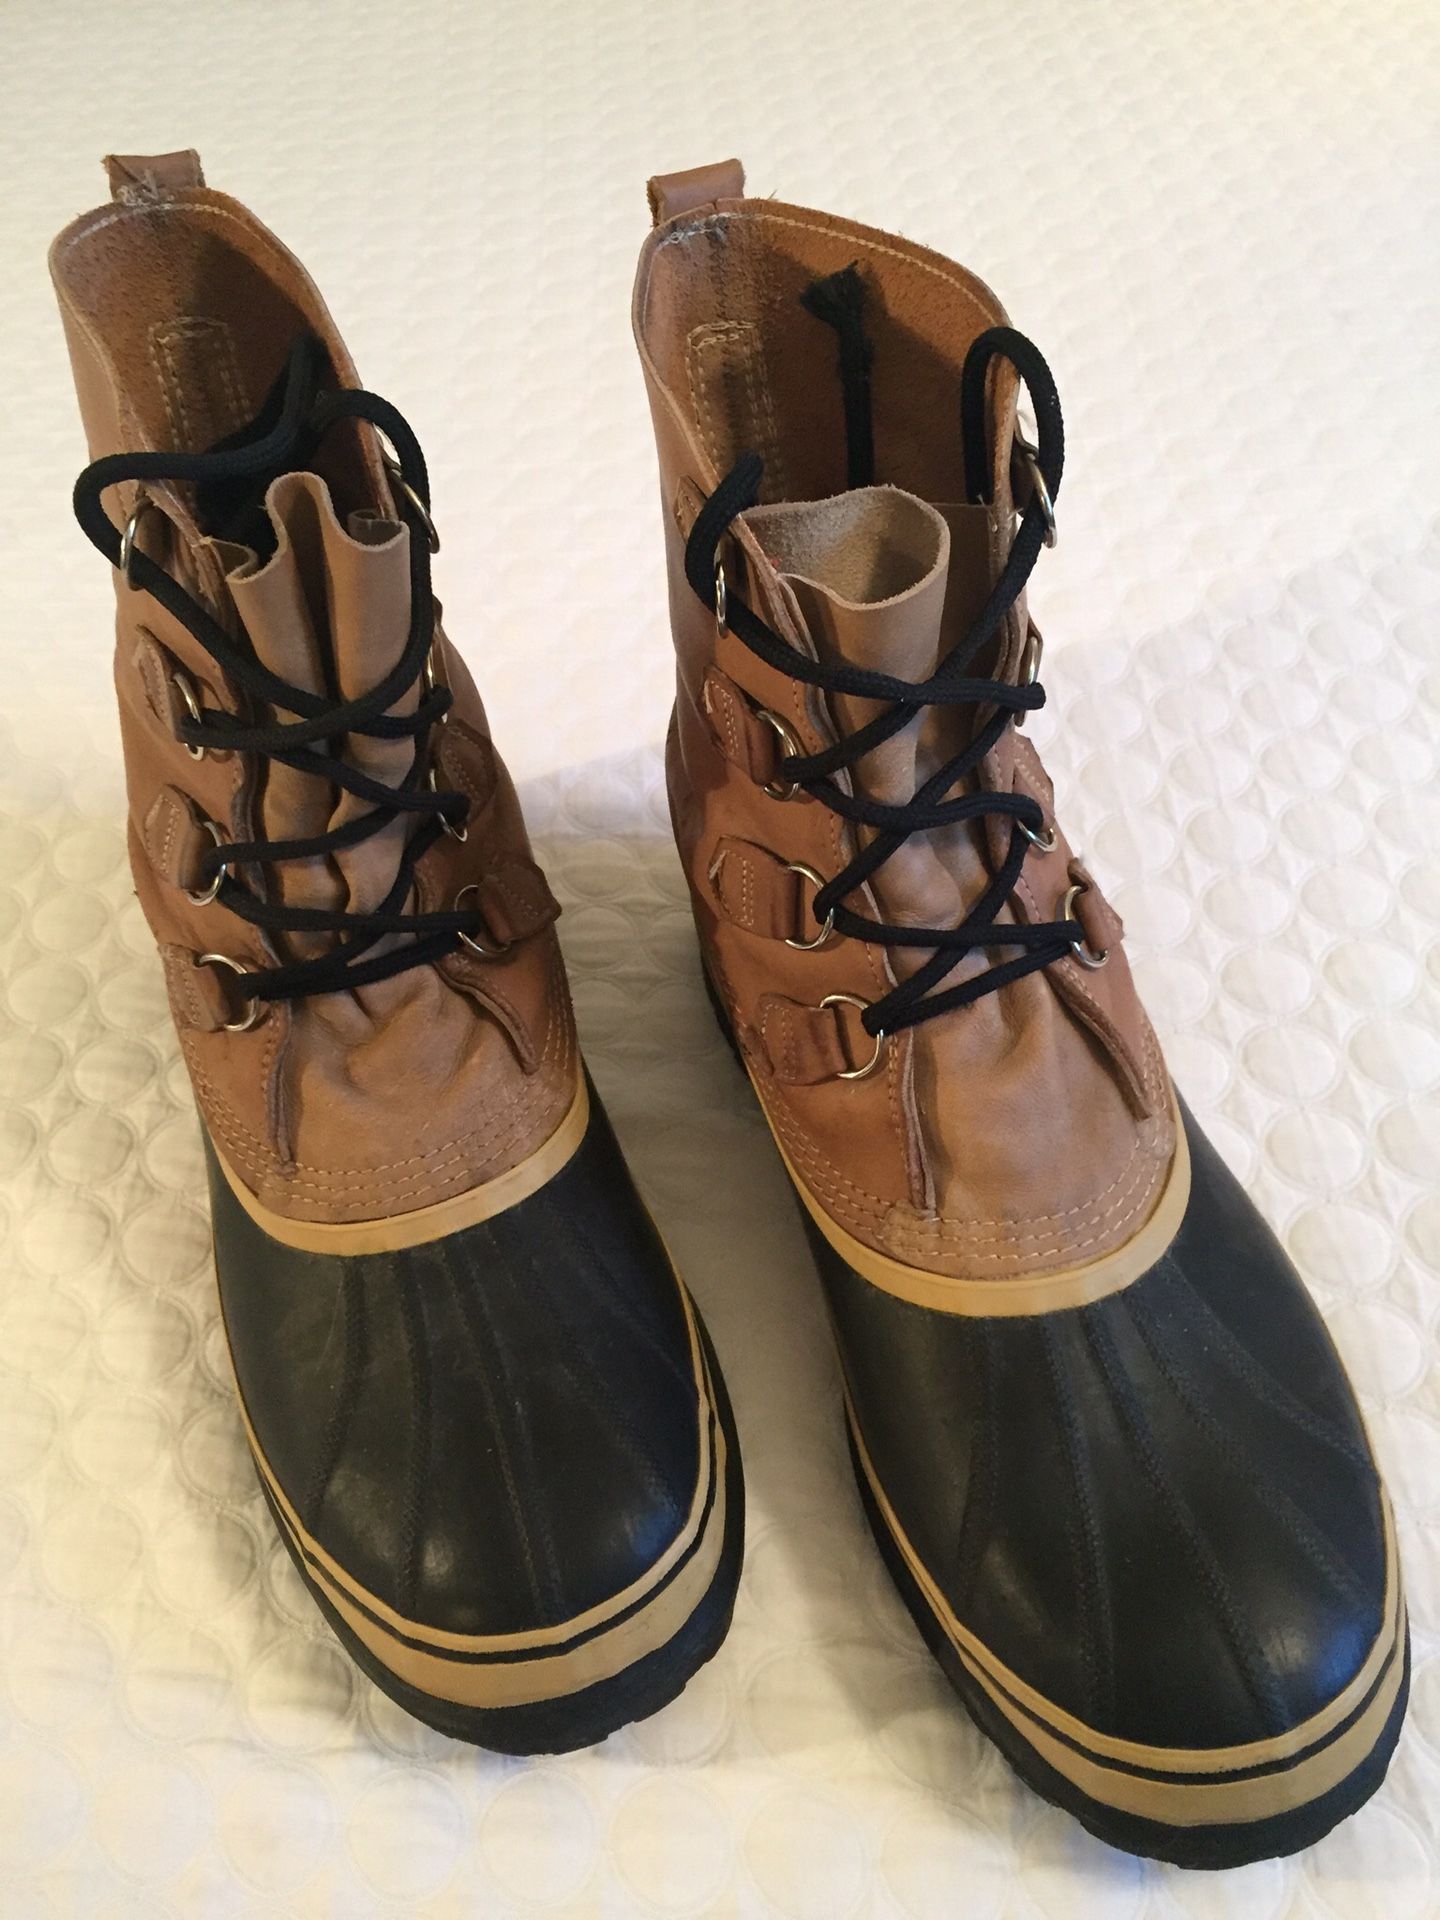 LIKE BRAND NEW SOREL SENTRY BOOTS. SIZE 12